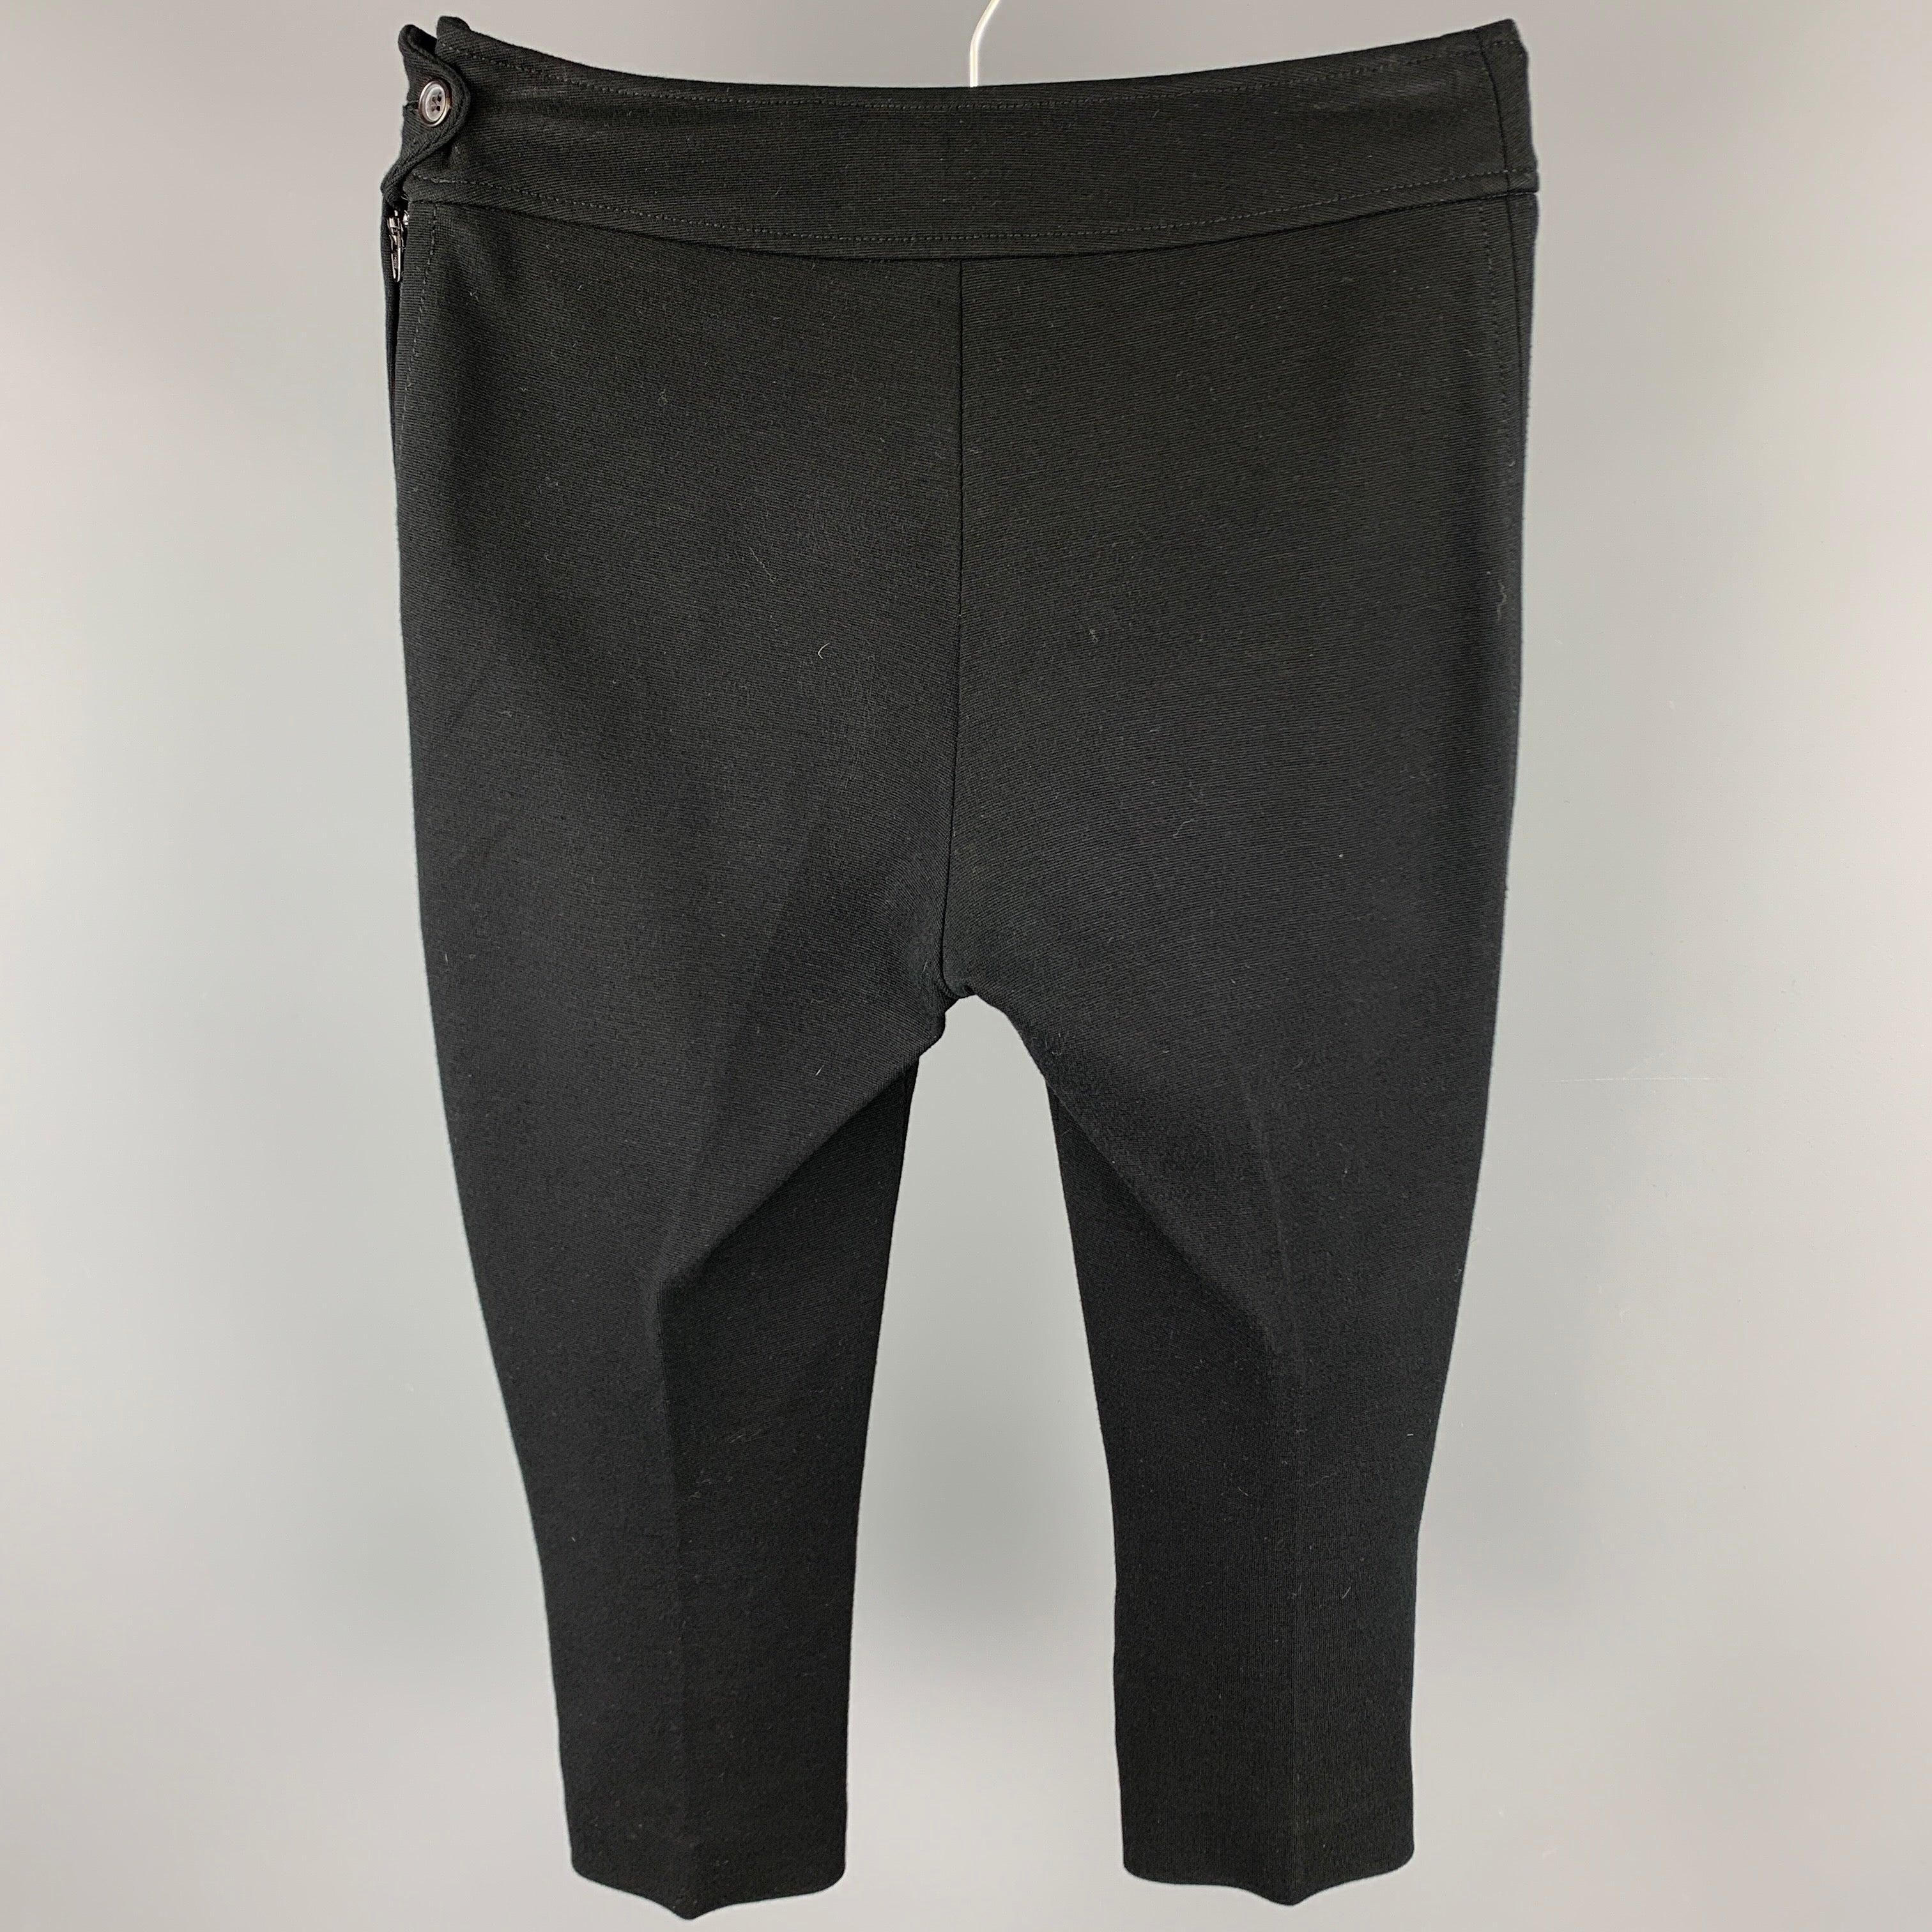 PAUL SMITH Blue leggings comes in a black rayon blend featuring a cropped style and a side button & zip up closure. Made in Italy.Good
Pre-Owned Condition. 

Marked:   IT 40 

Measurements: 
  Waist: 28 inches Rise: 8 inches 
Inseam: 19 inches 
  
 